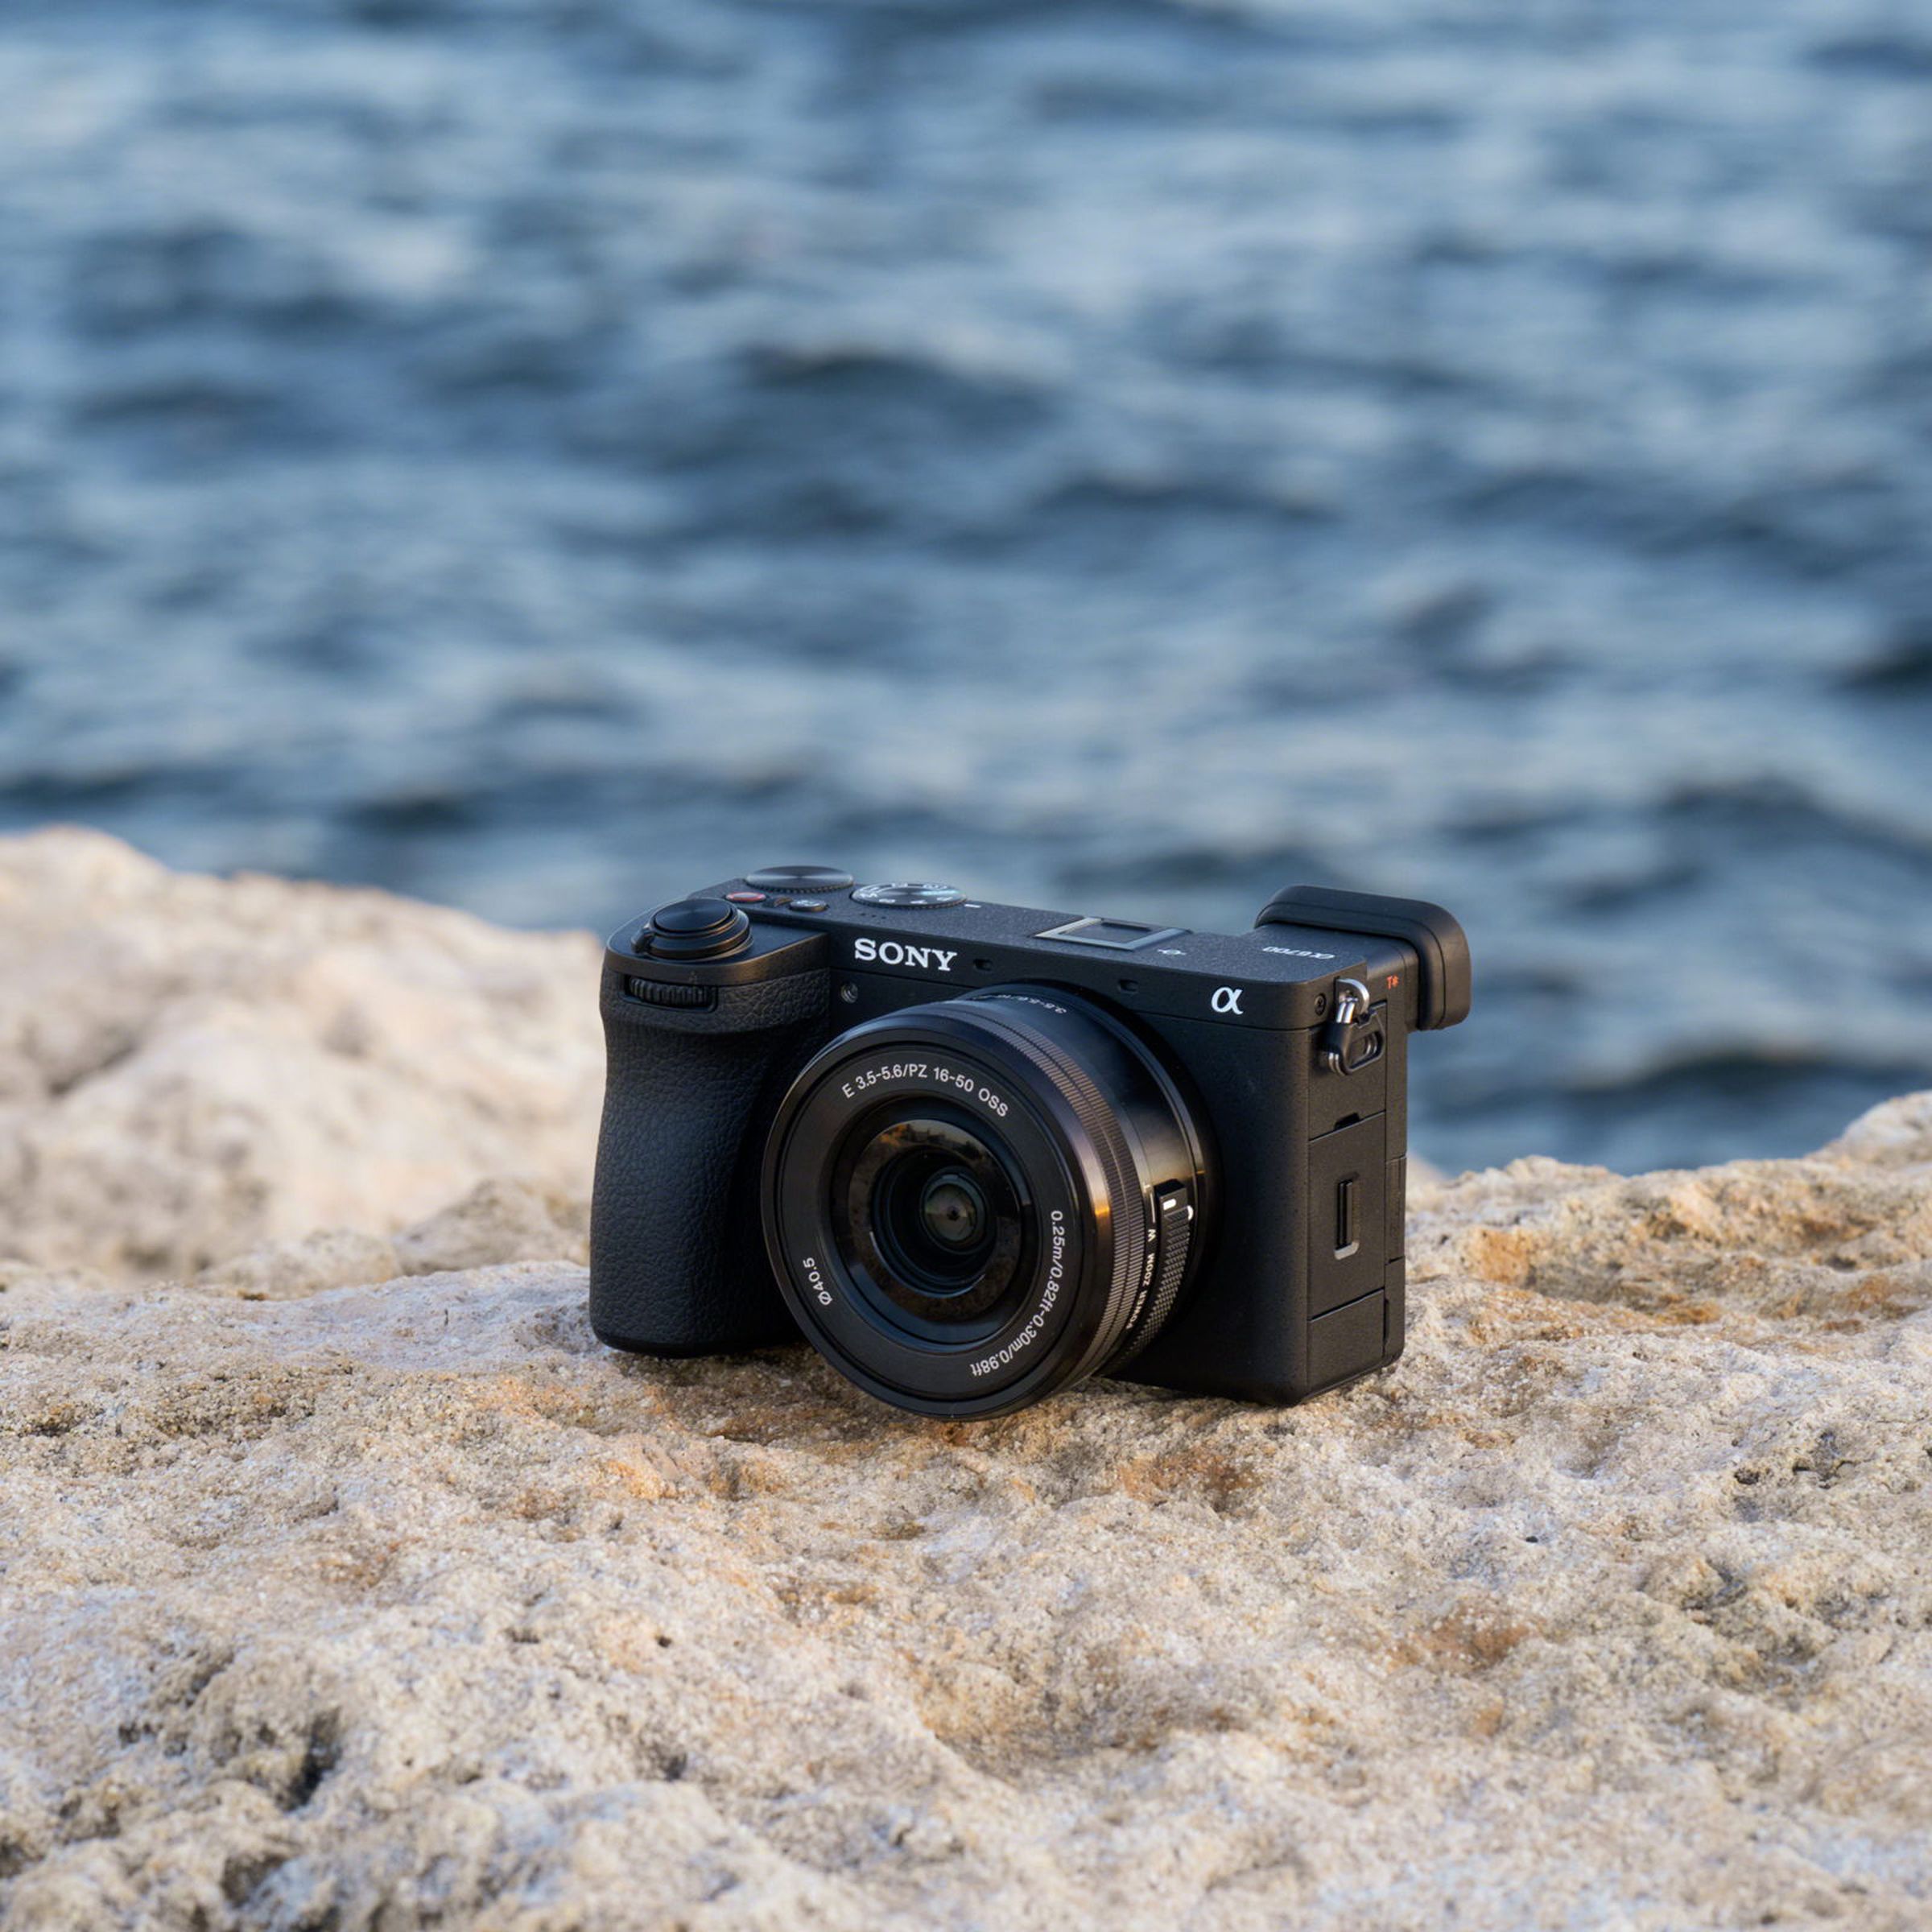 A three-quarter shot of the Sony A6700 sitting on a porous, beige rock near what appears to be ocean water.